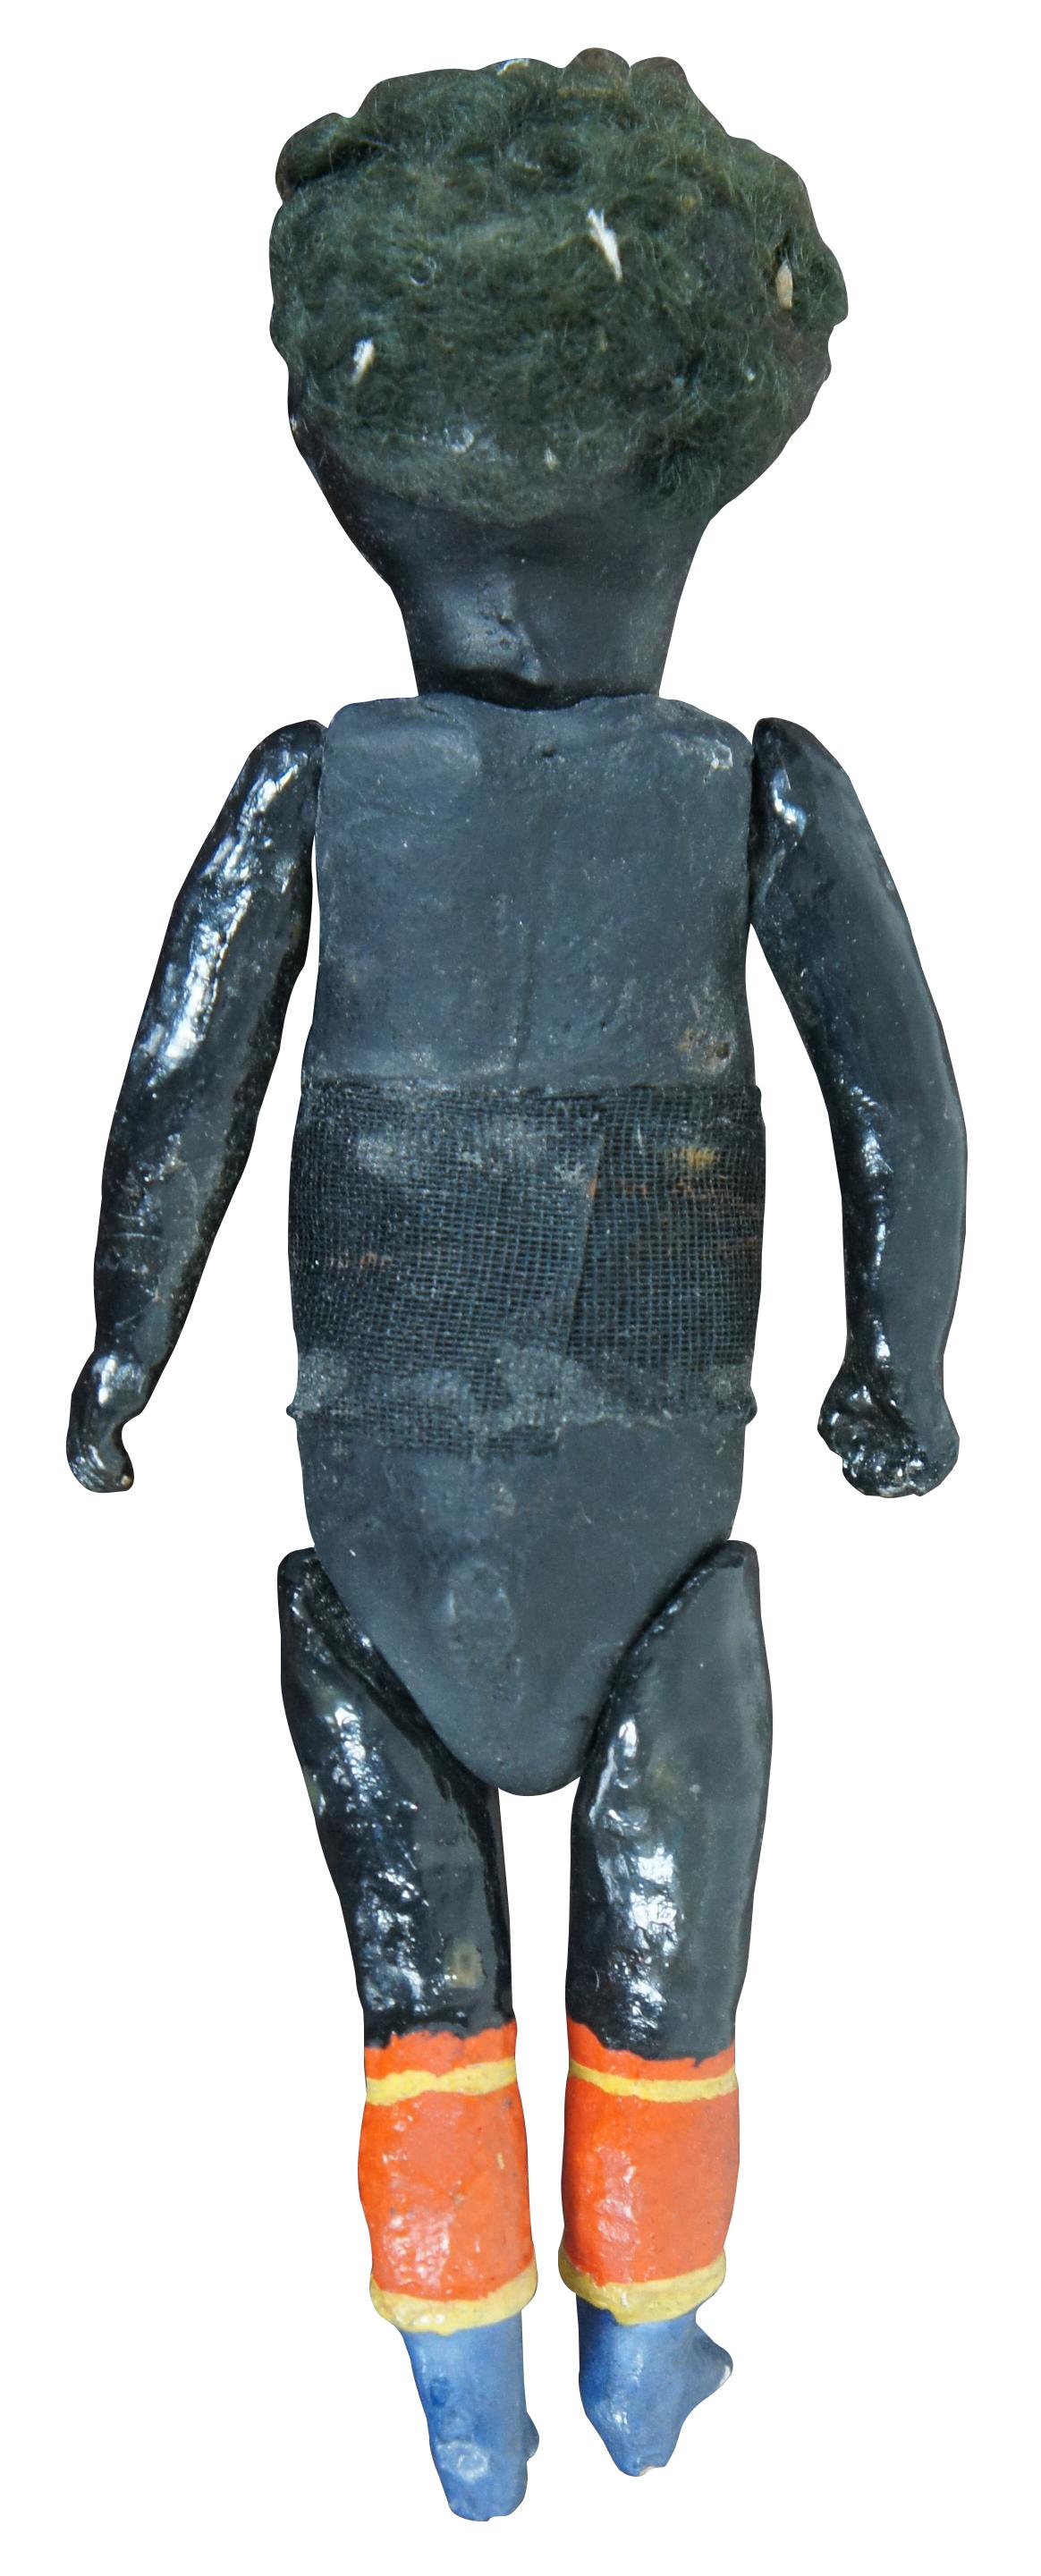 Antique 19th century black doll with full bisque body, jointed limbs and blue and red painted boots. Measures: 8.5”.
   